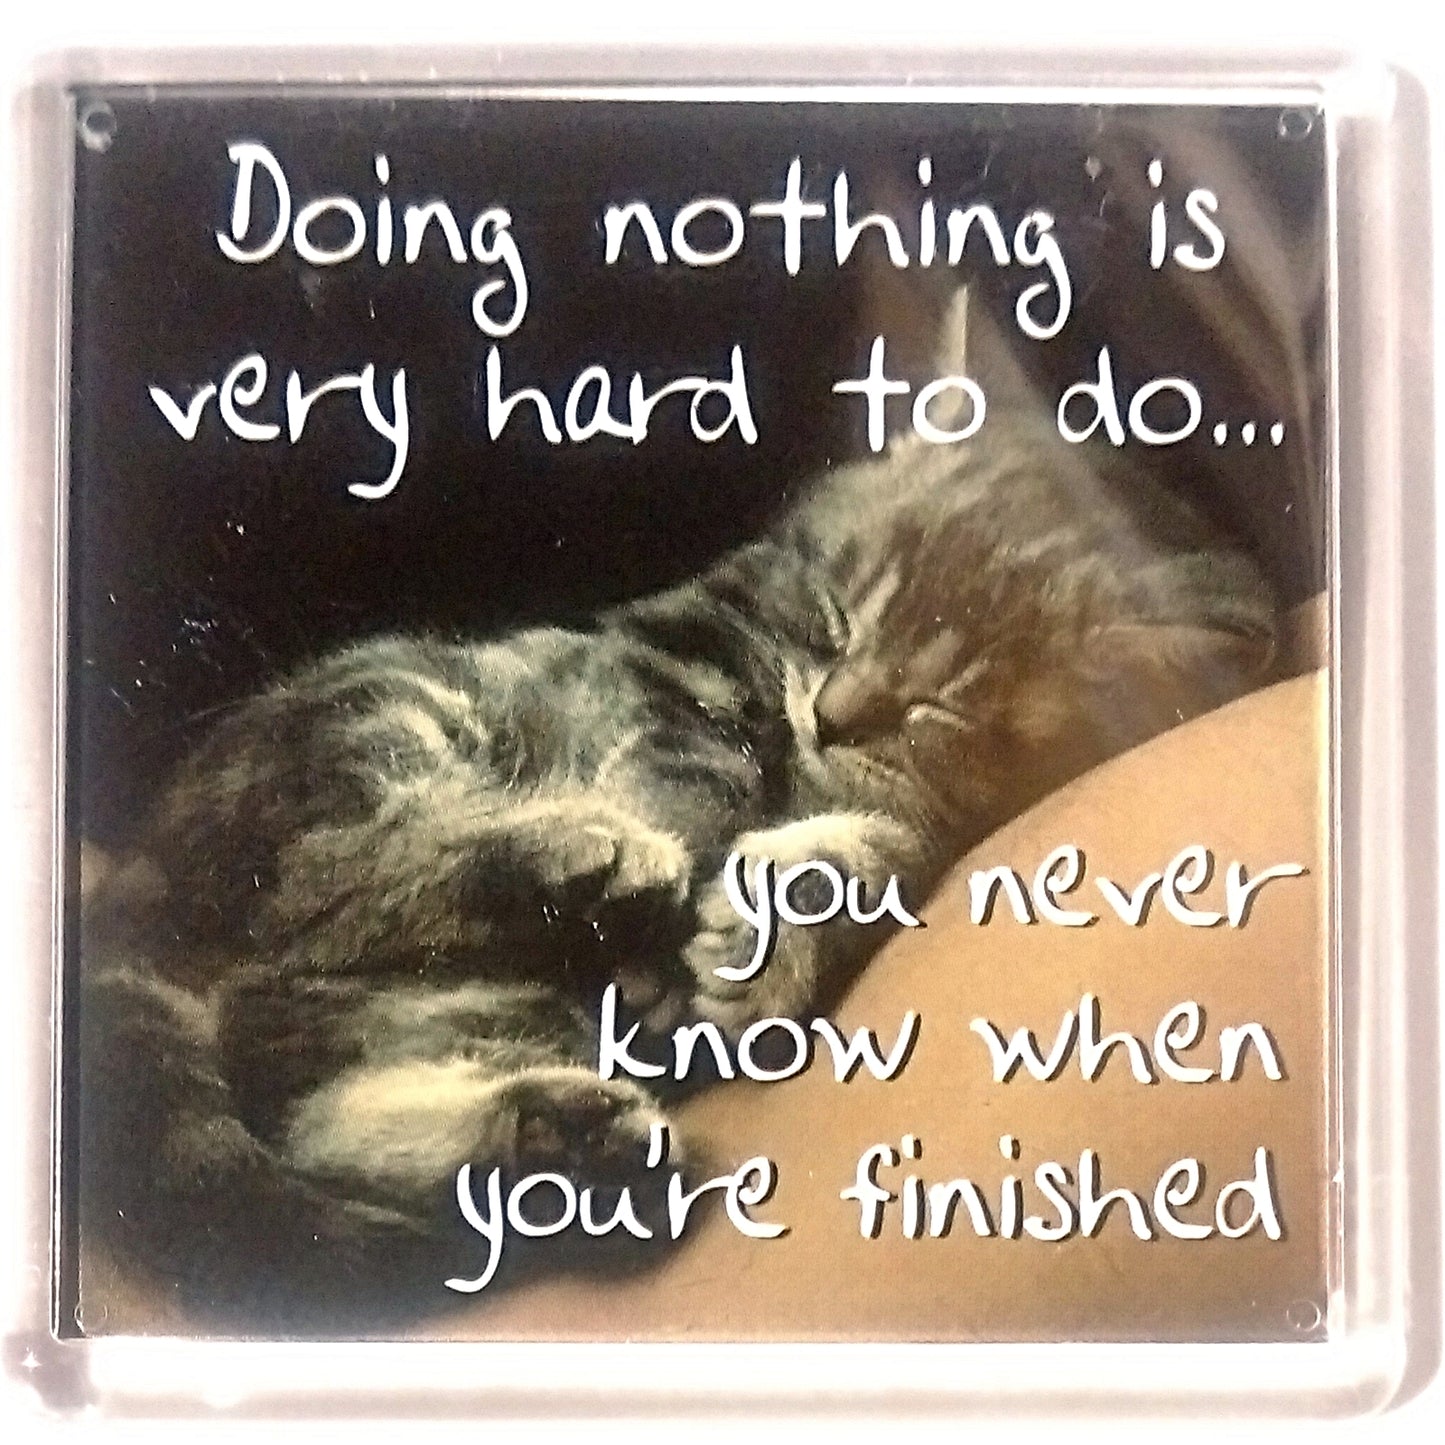 Heart And Home Sentiment Fridge Magnet - Animal MAG-063 / Doing nothing is very hard to do... You never know when you're finished